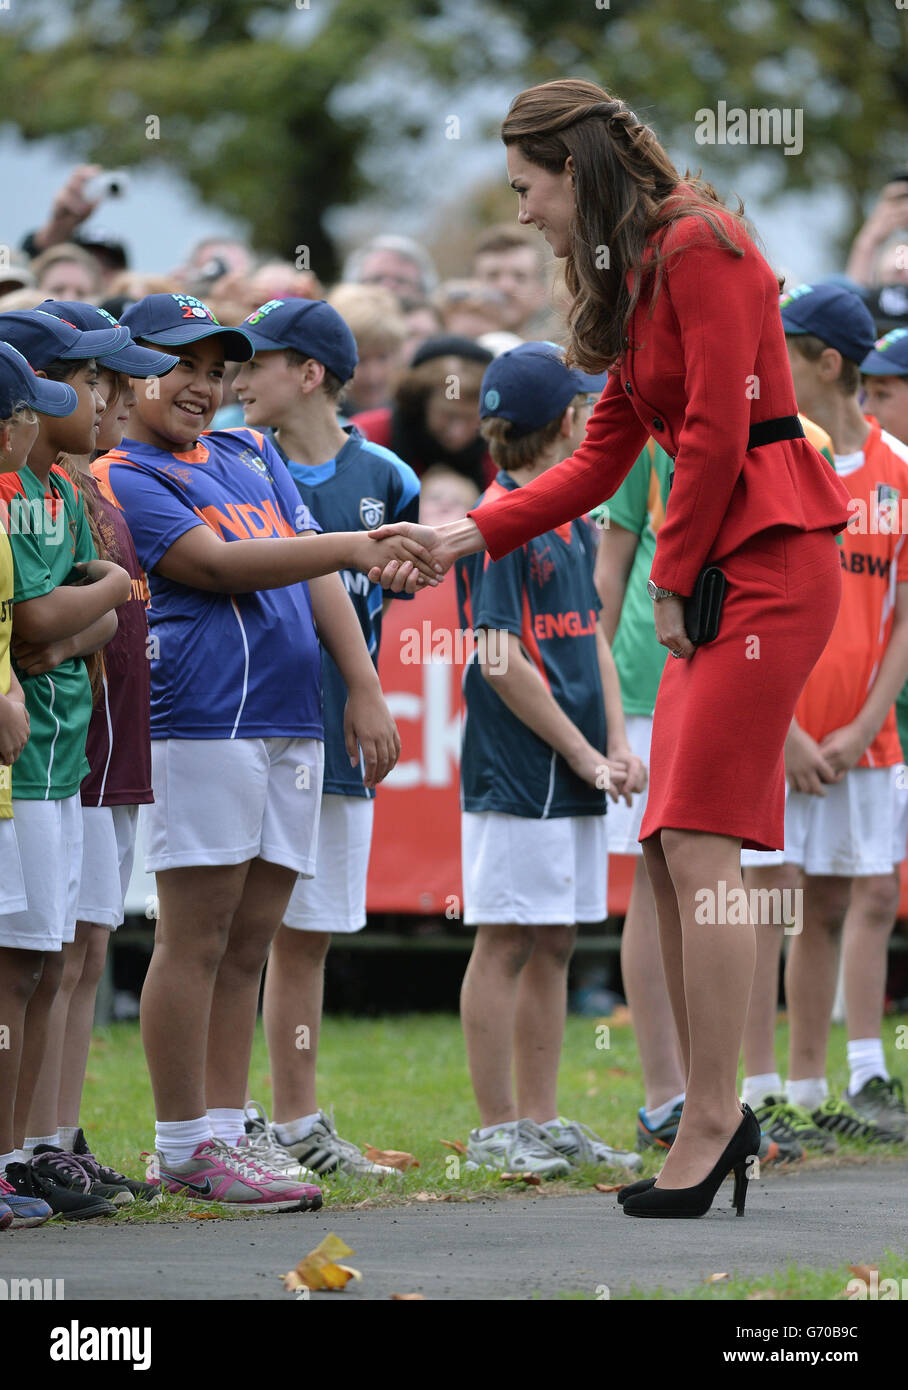 The Duke and Duchess of Cambridge meet children during a 2015 Cricket World Cup event in Christchurch during the eighth day of their official tour to New Zealand. Stock Photo